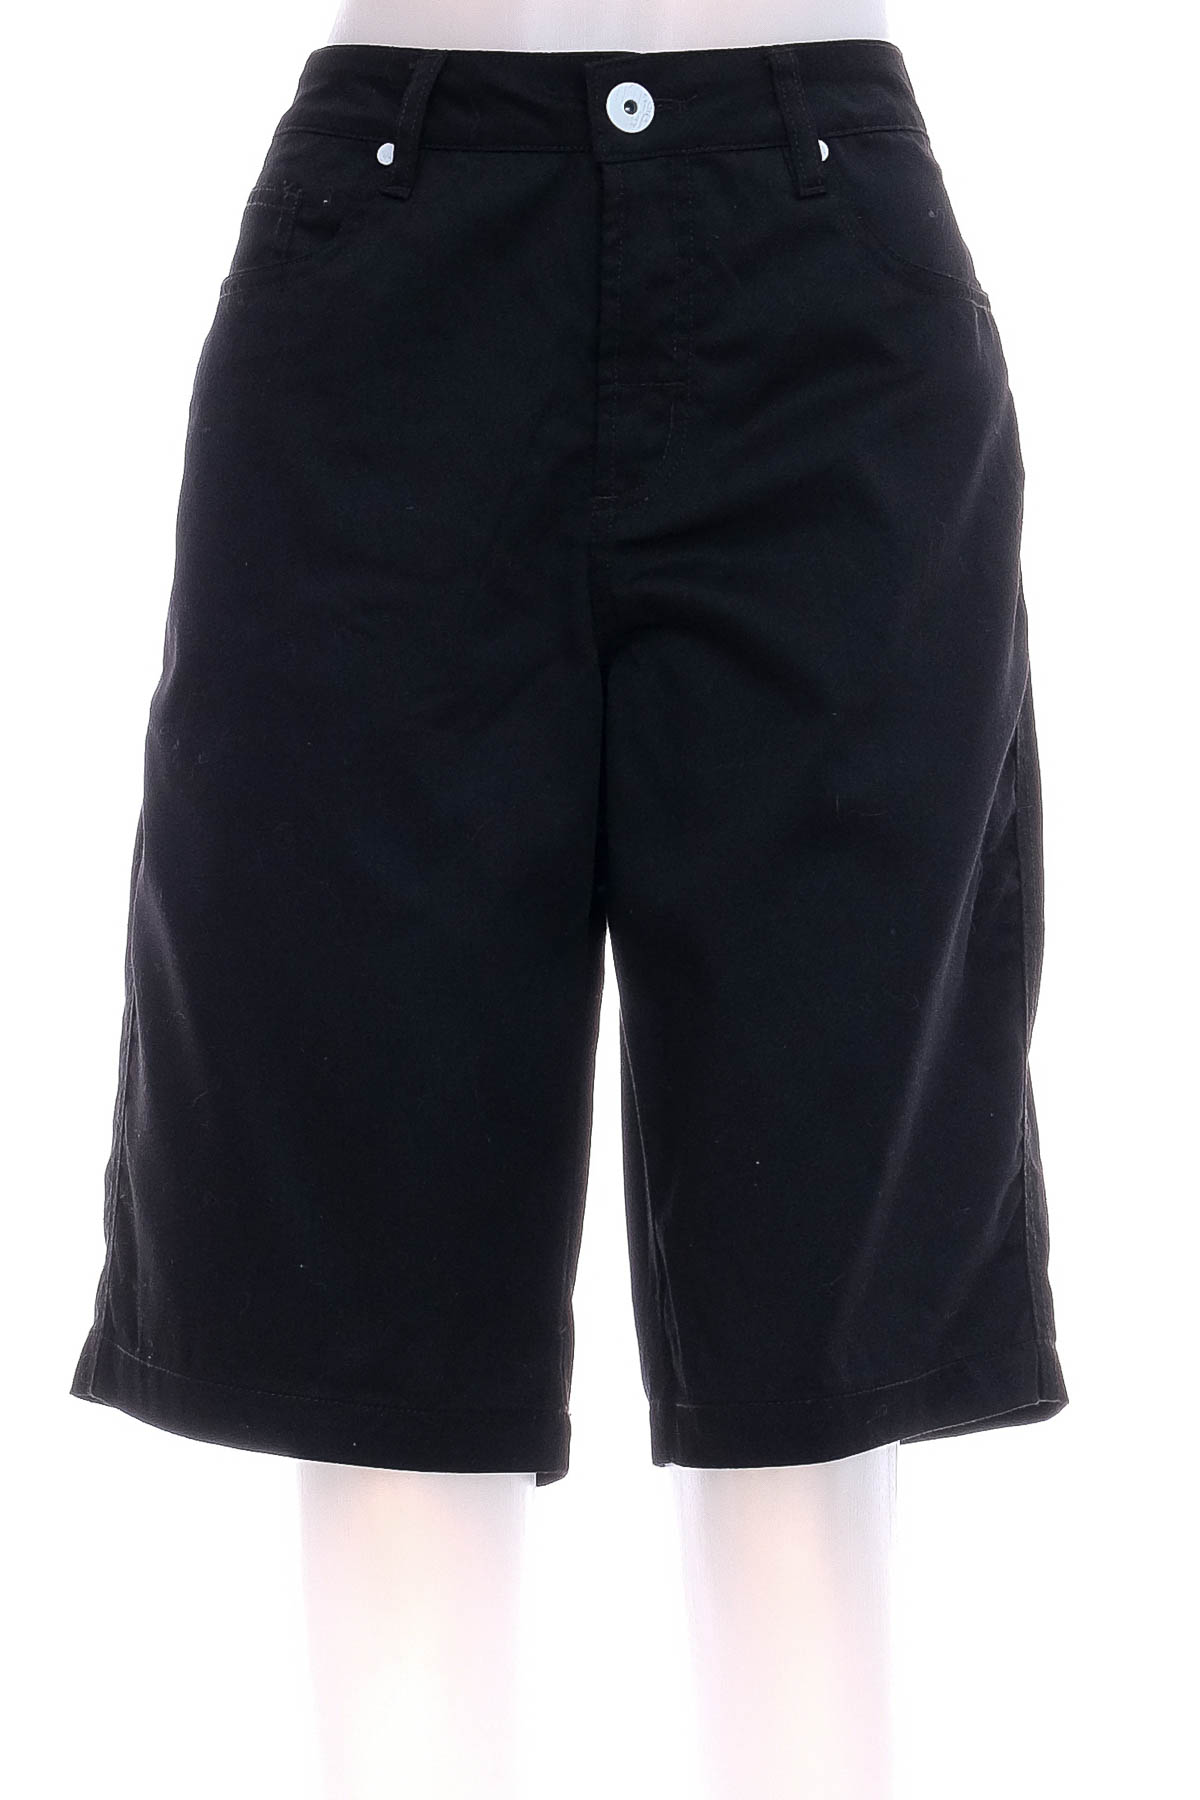 Men's shorts - Much More - 0